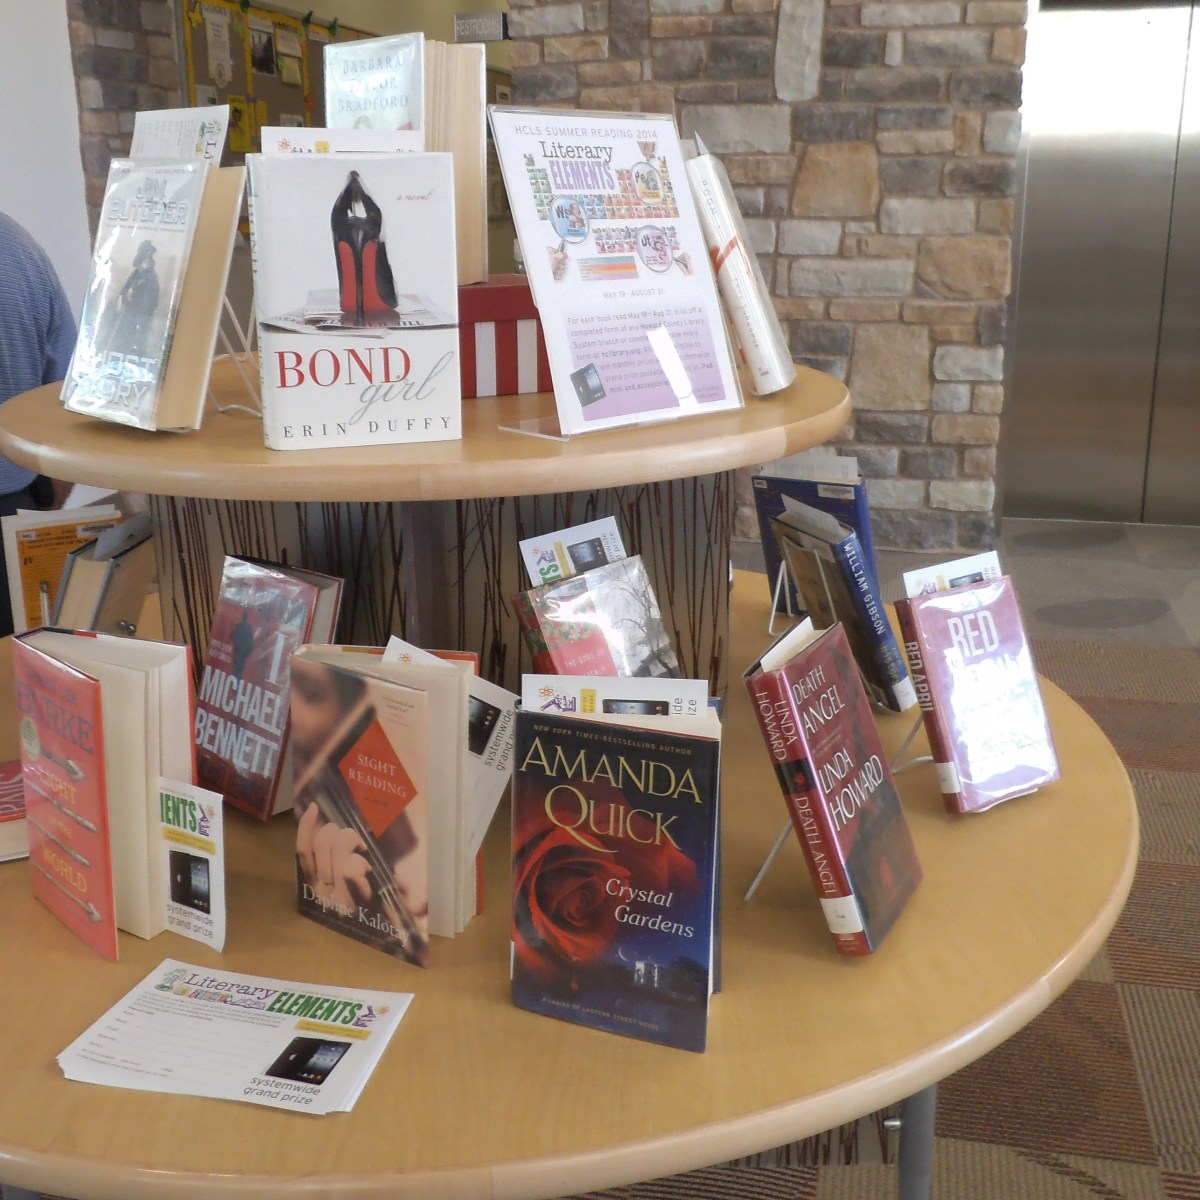 You can stand the book up by fanning out the pages or get some slim wire racks to place the books upright on the tabletop display. 